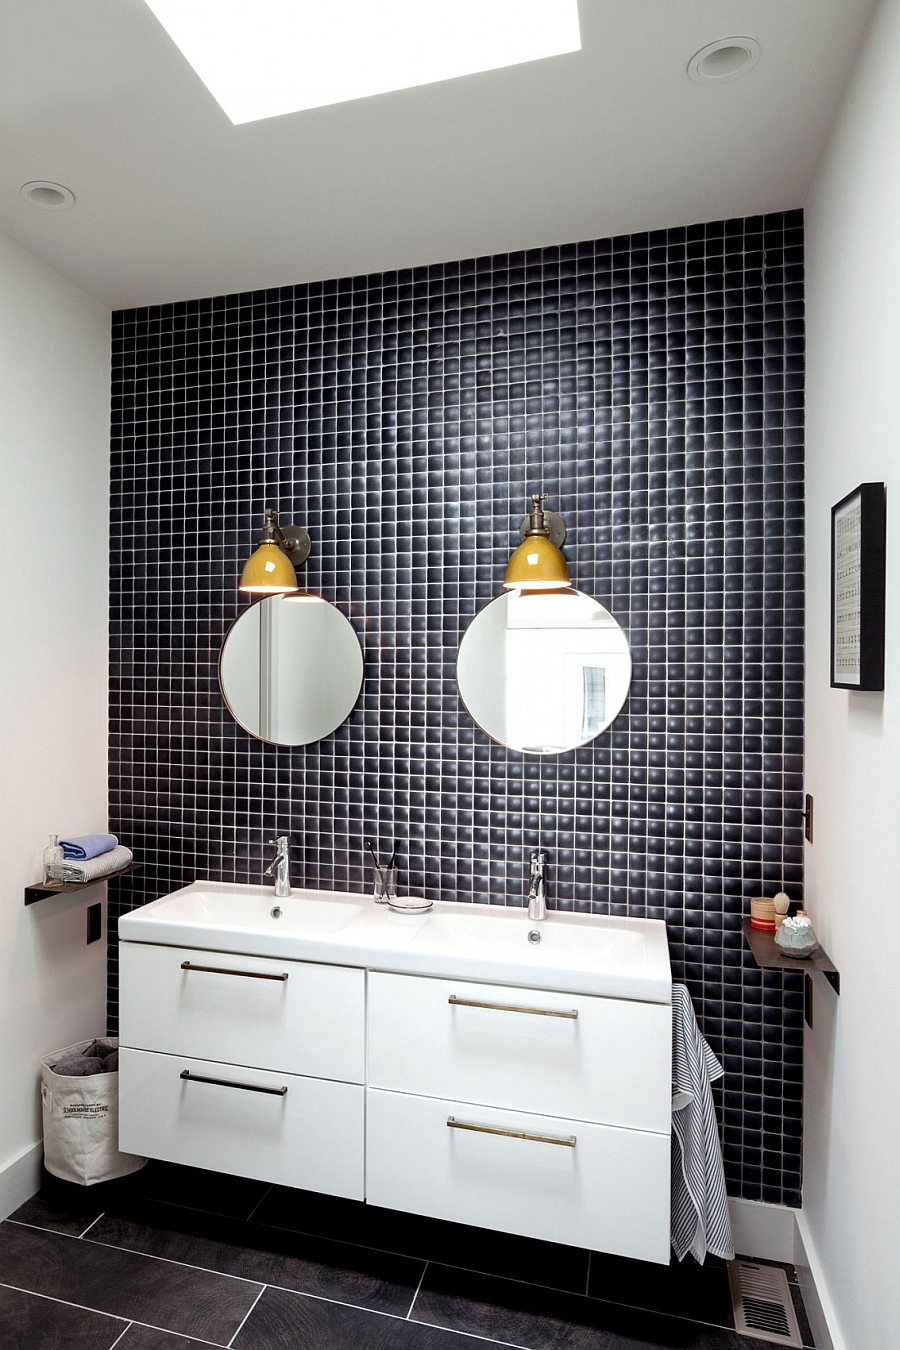 Yellow lighting fixtures bring color into the bathroom